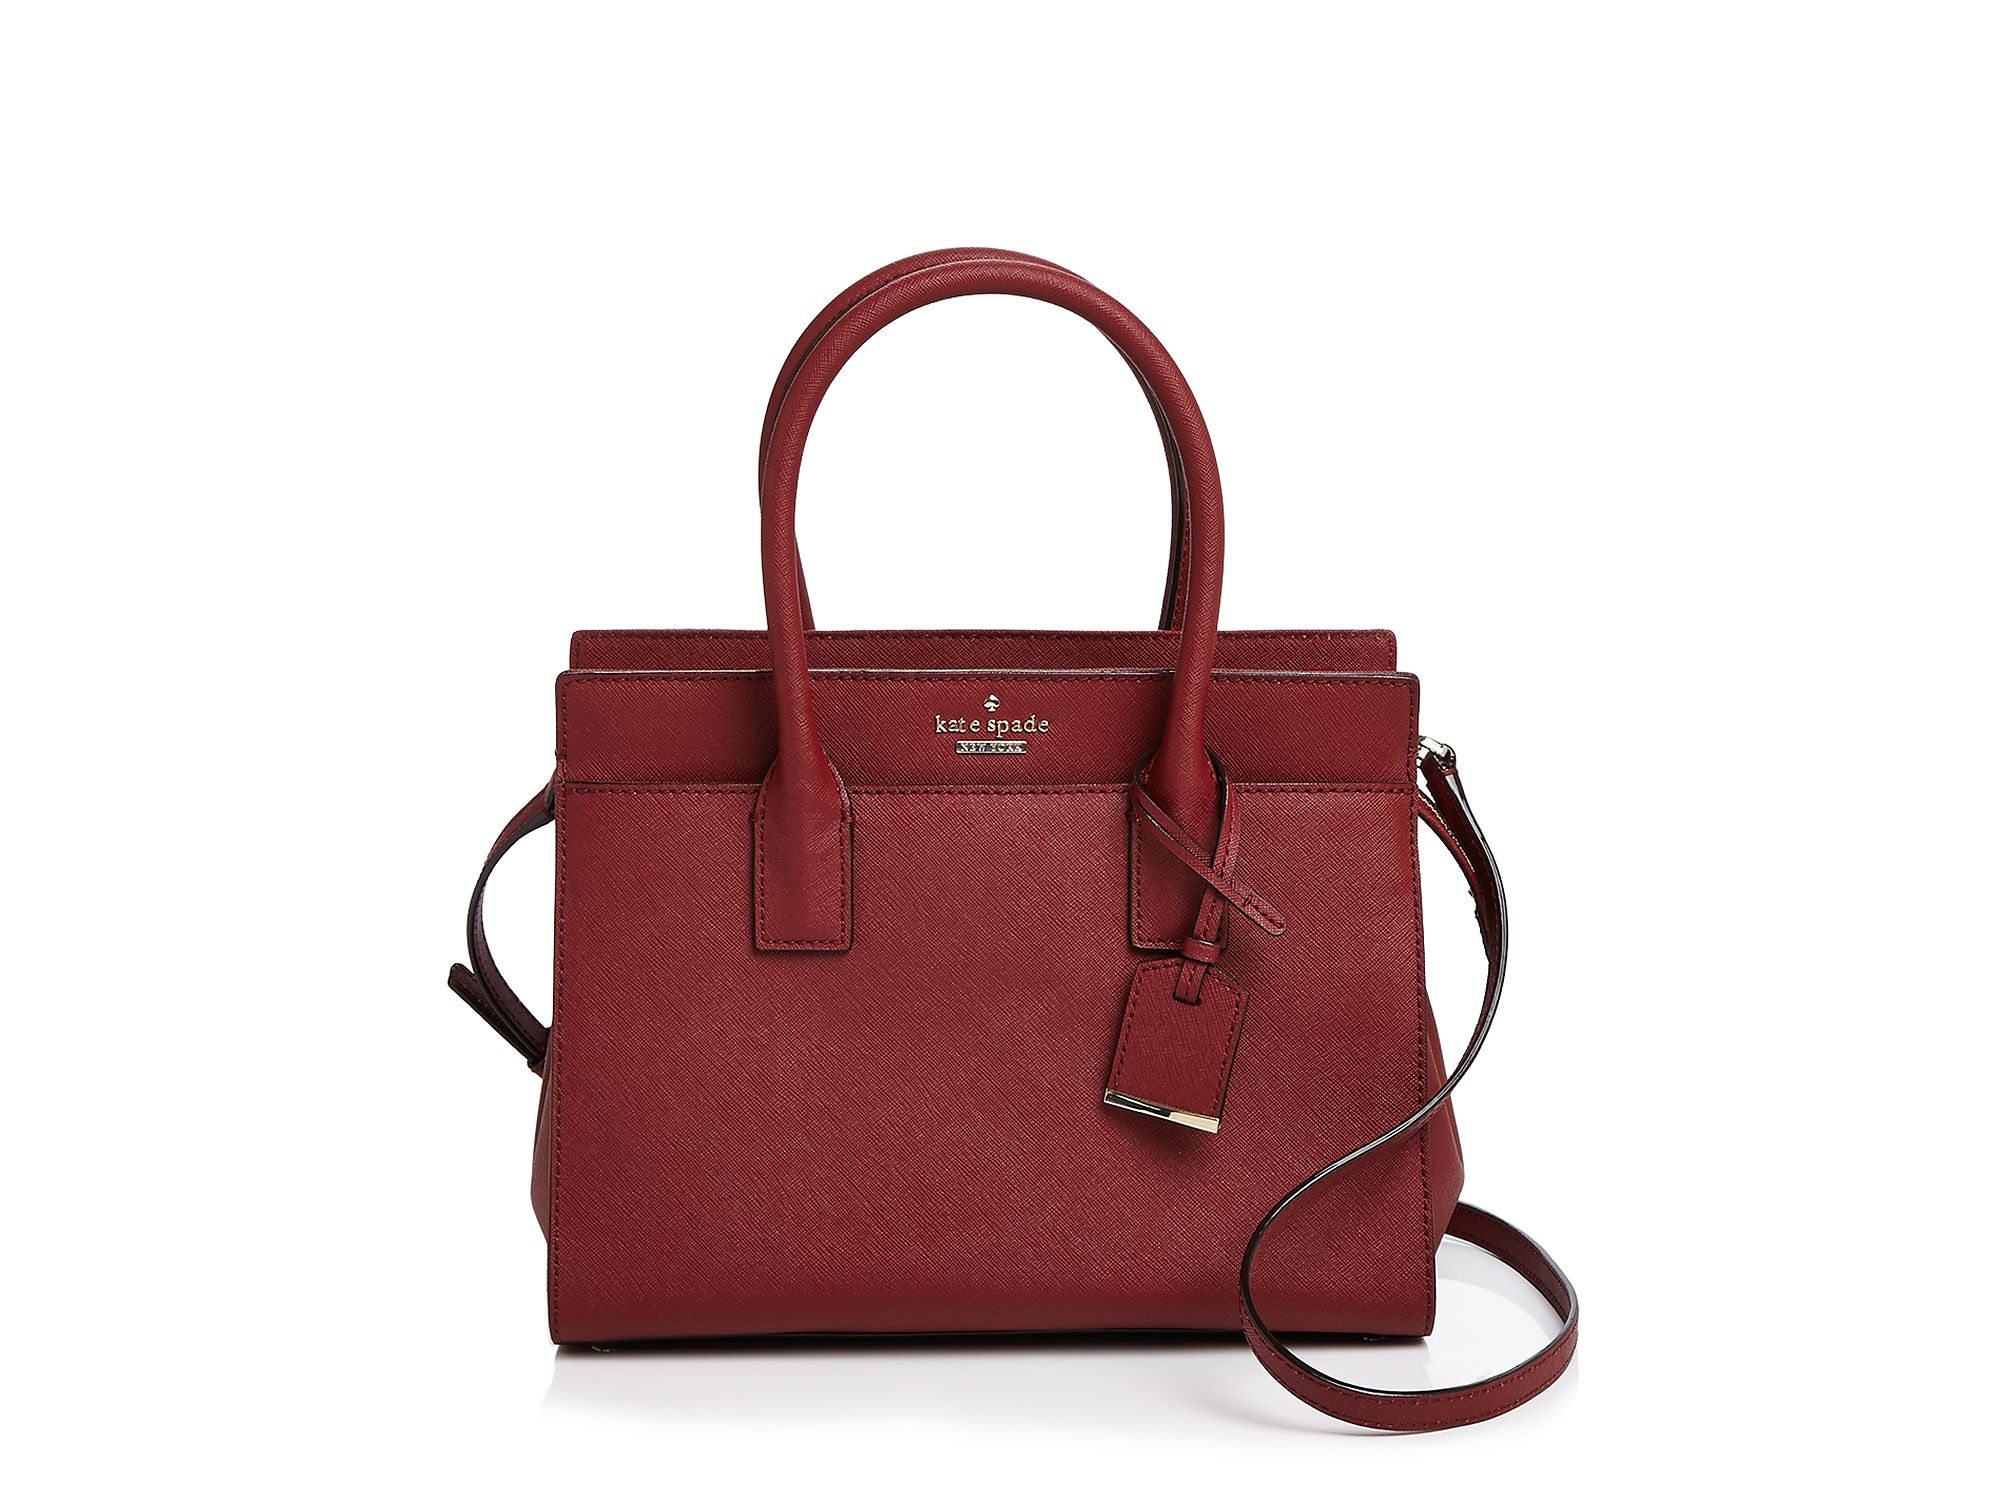 Lyst - Kate Spade New York Cameron Street Small Candace Satchel in Red